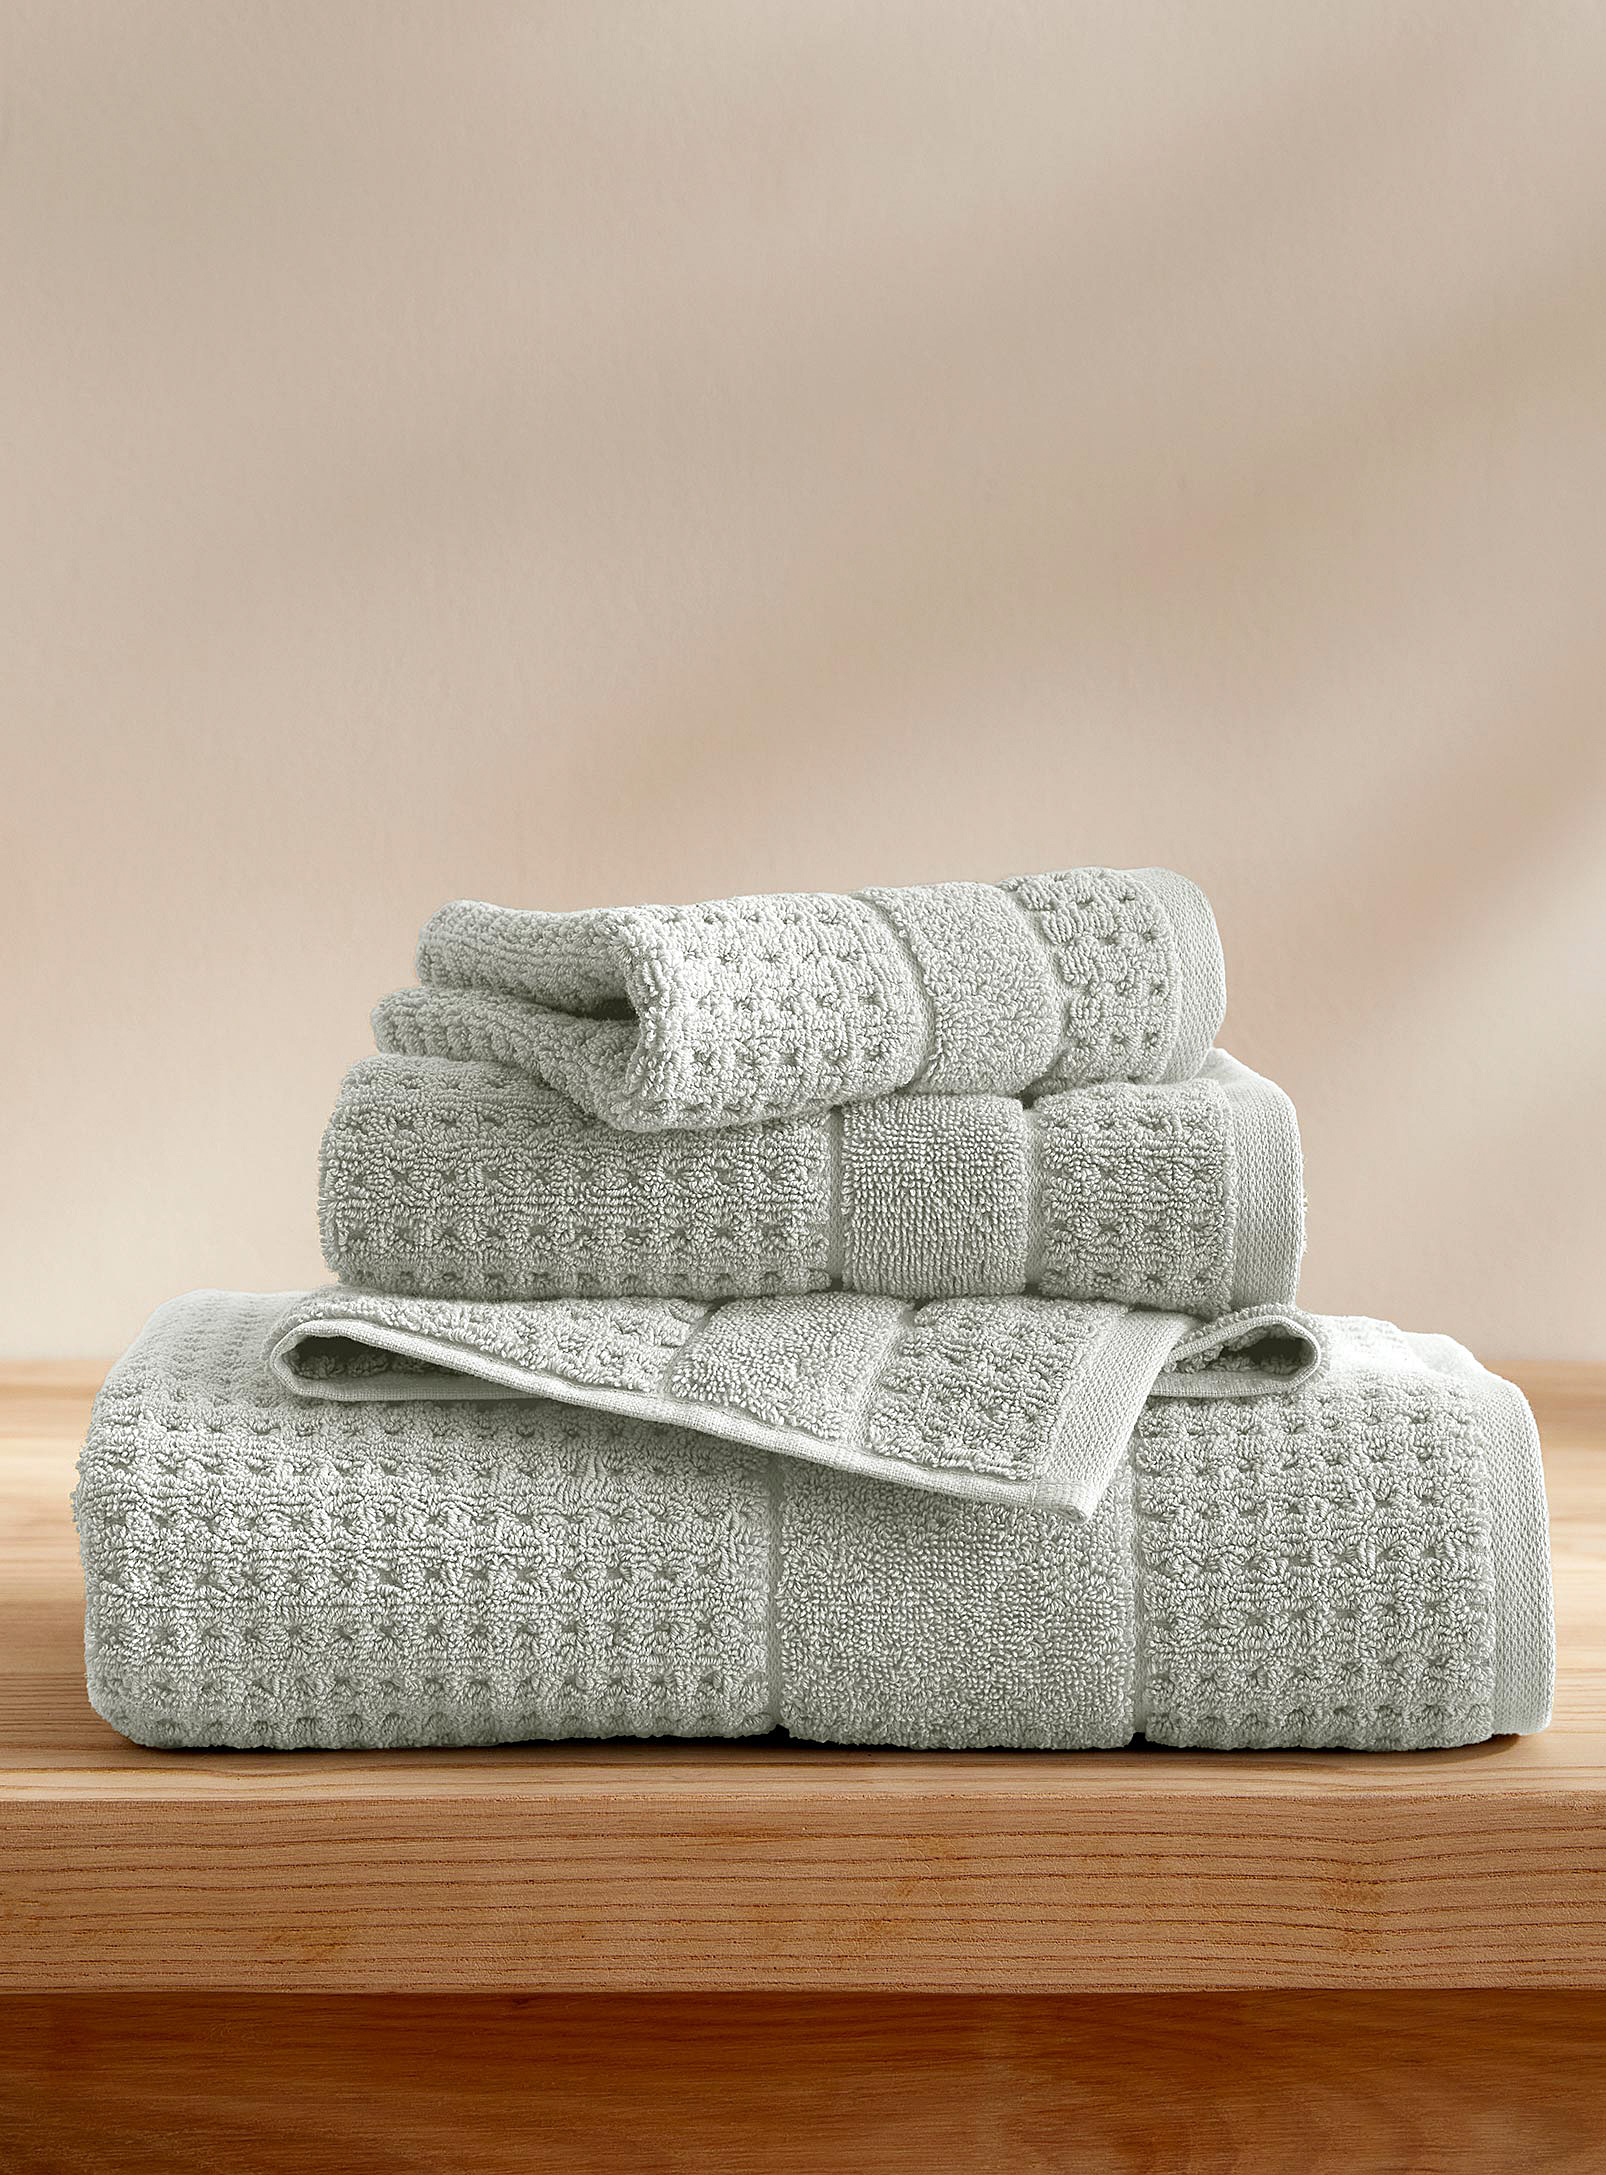 Simons Maison Ultra-soft Brushed Turkish Cotton Towels Durable And Enveloping, Waffled Texture